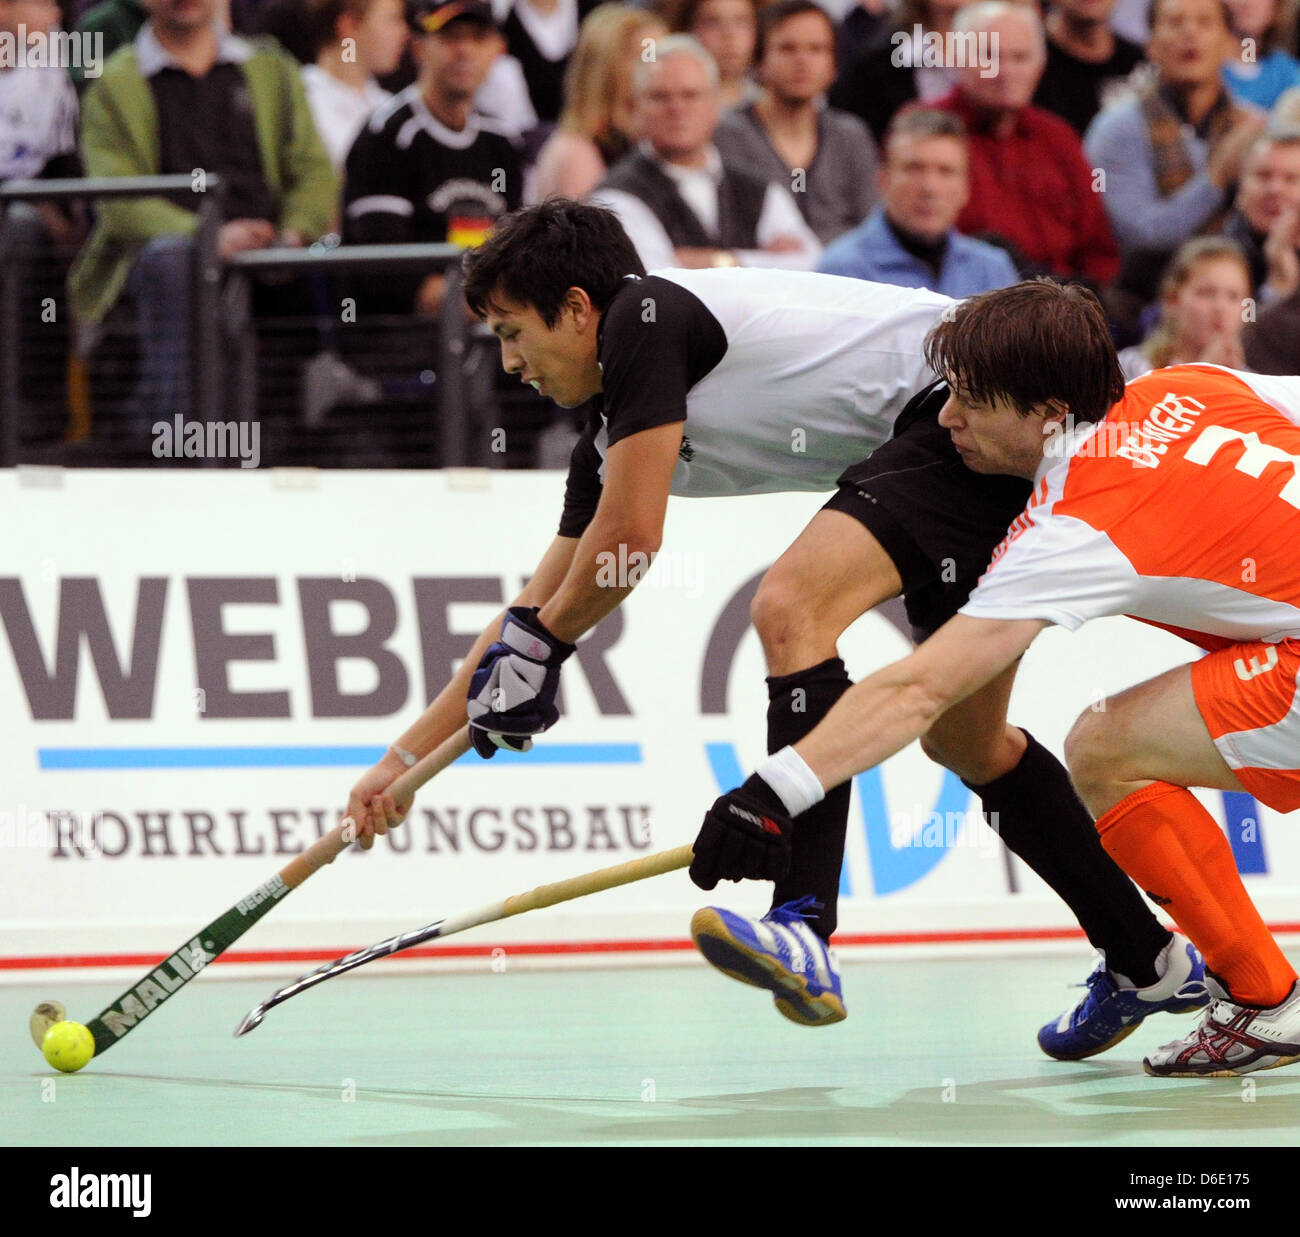 Austria's Philip Greutter (L) and Netherland's Sjoerd de Wert fight for the ball during the European Indoor Hockey Championship match between Austria and The Netherlands at the Arena Leipzig in Leipzig, Germany, 15 January 2012. Photo: HENDRIK SCHMIDT Stock Photo